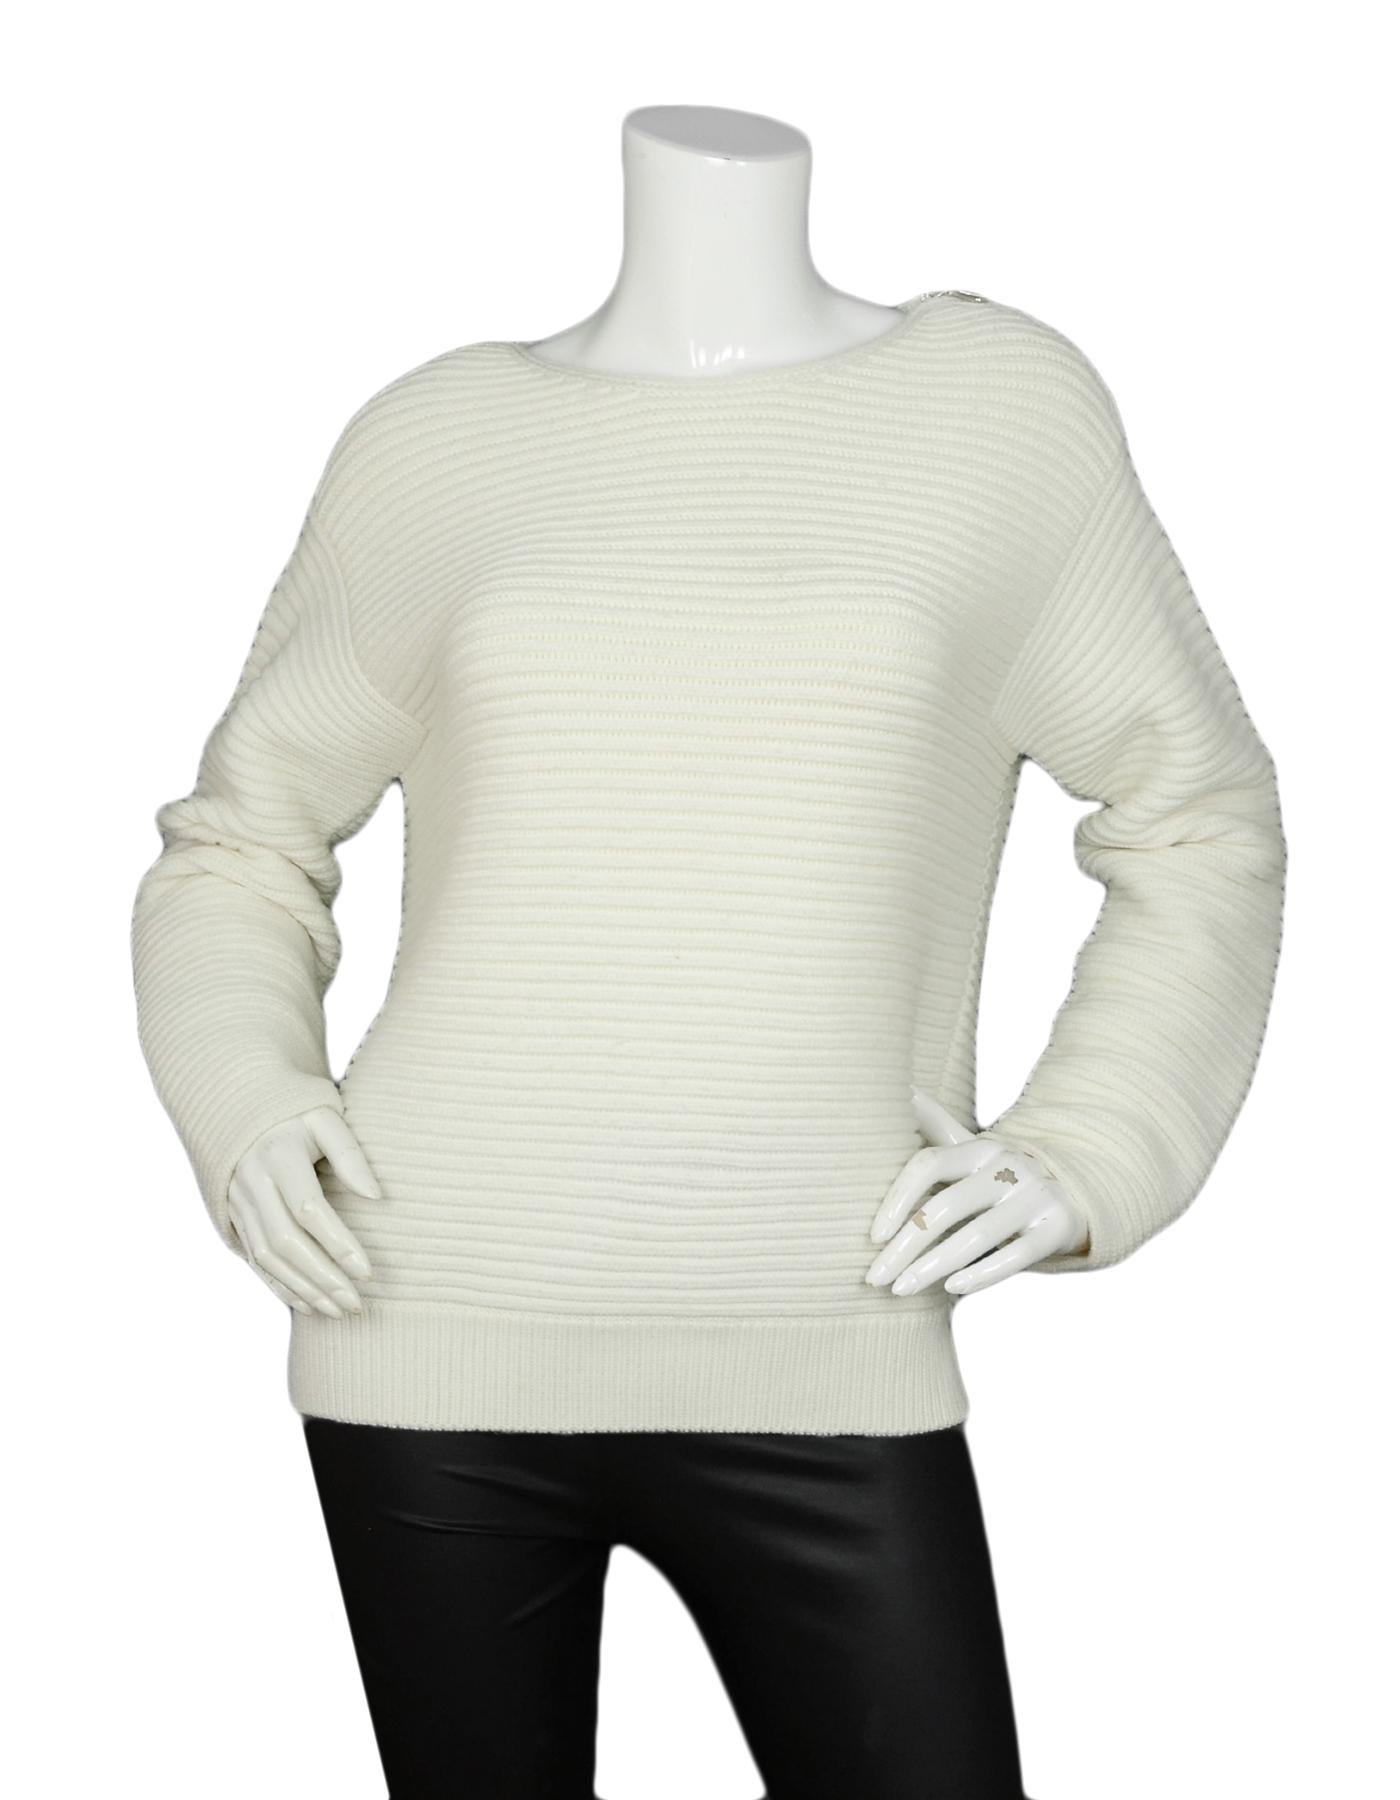 Akris White Wool Ribbed Sweater with Shoulder Zipper sz L

Made In: China; yarn origin Italy. 
Color: White
Materials: 100% Wool
Lining: 100% Wool
Opening/Closure: Slip on
Overall Condition: Excellent pre-owned condition

Tag Size: Large *Please